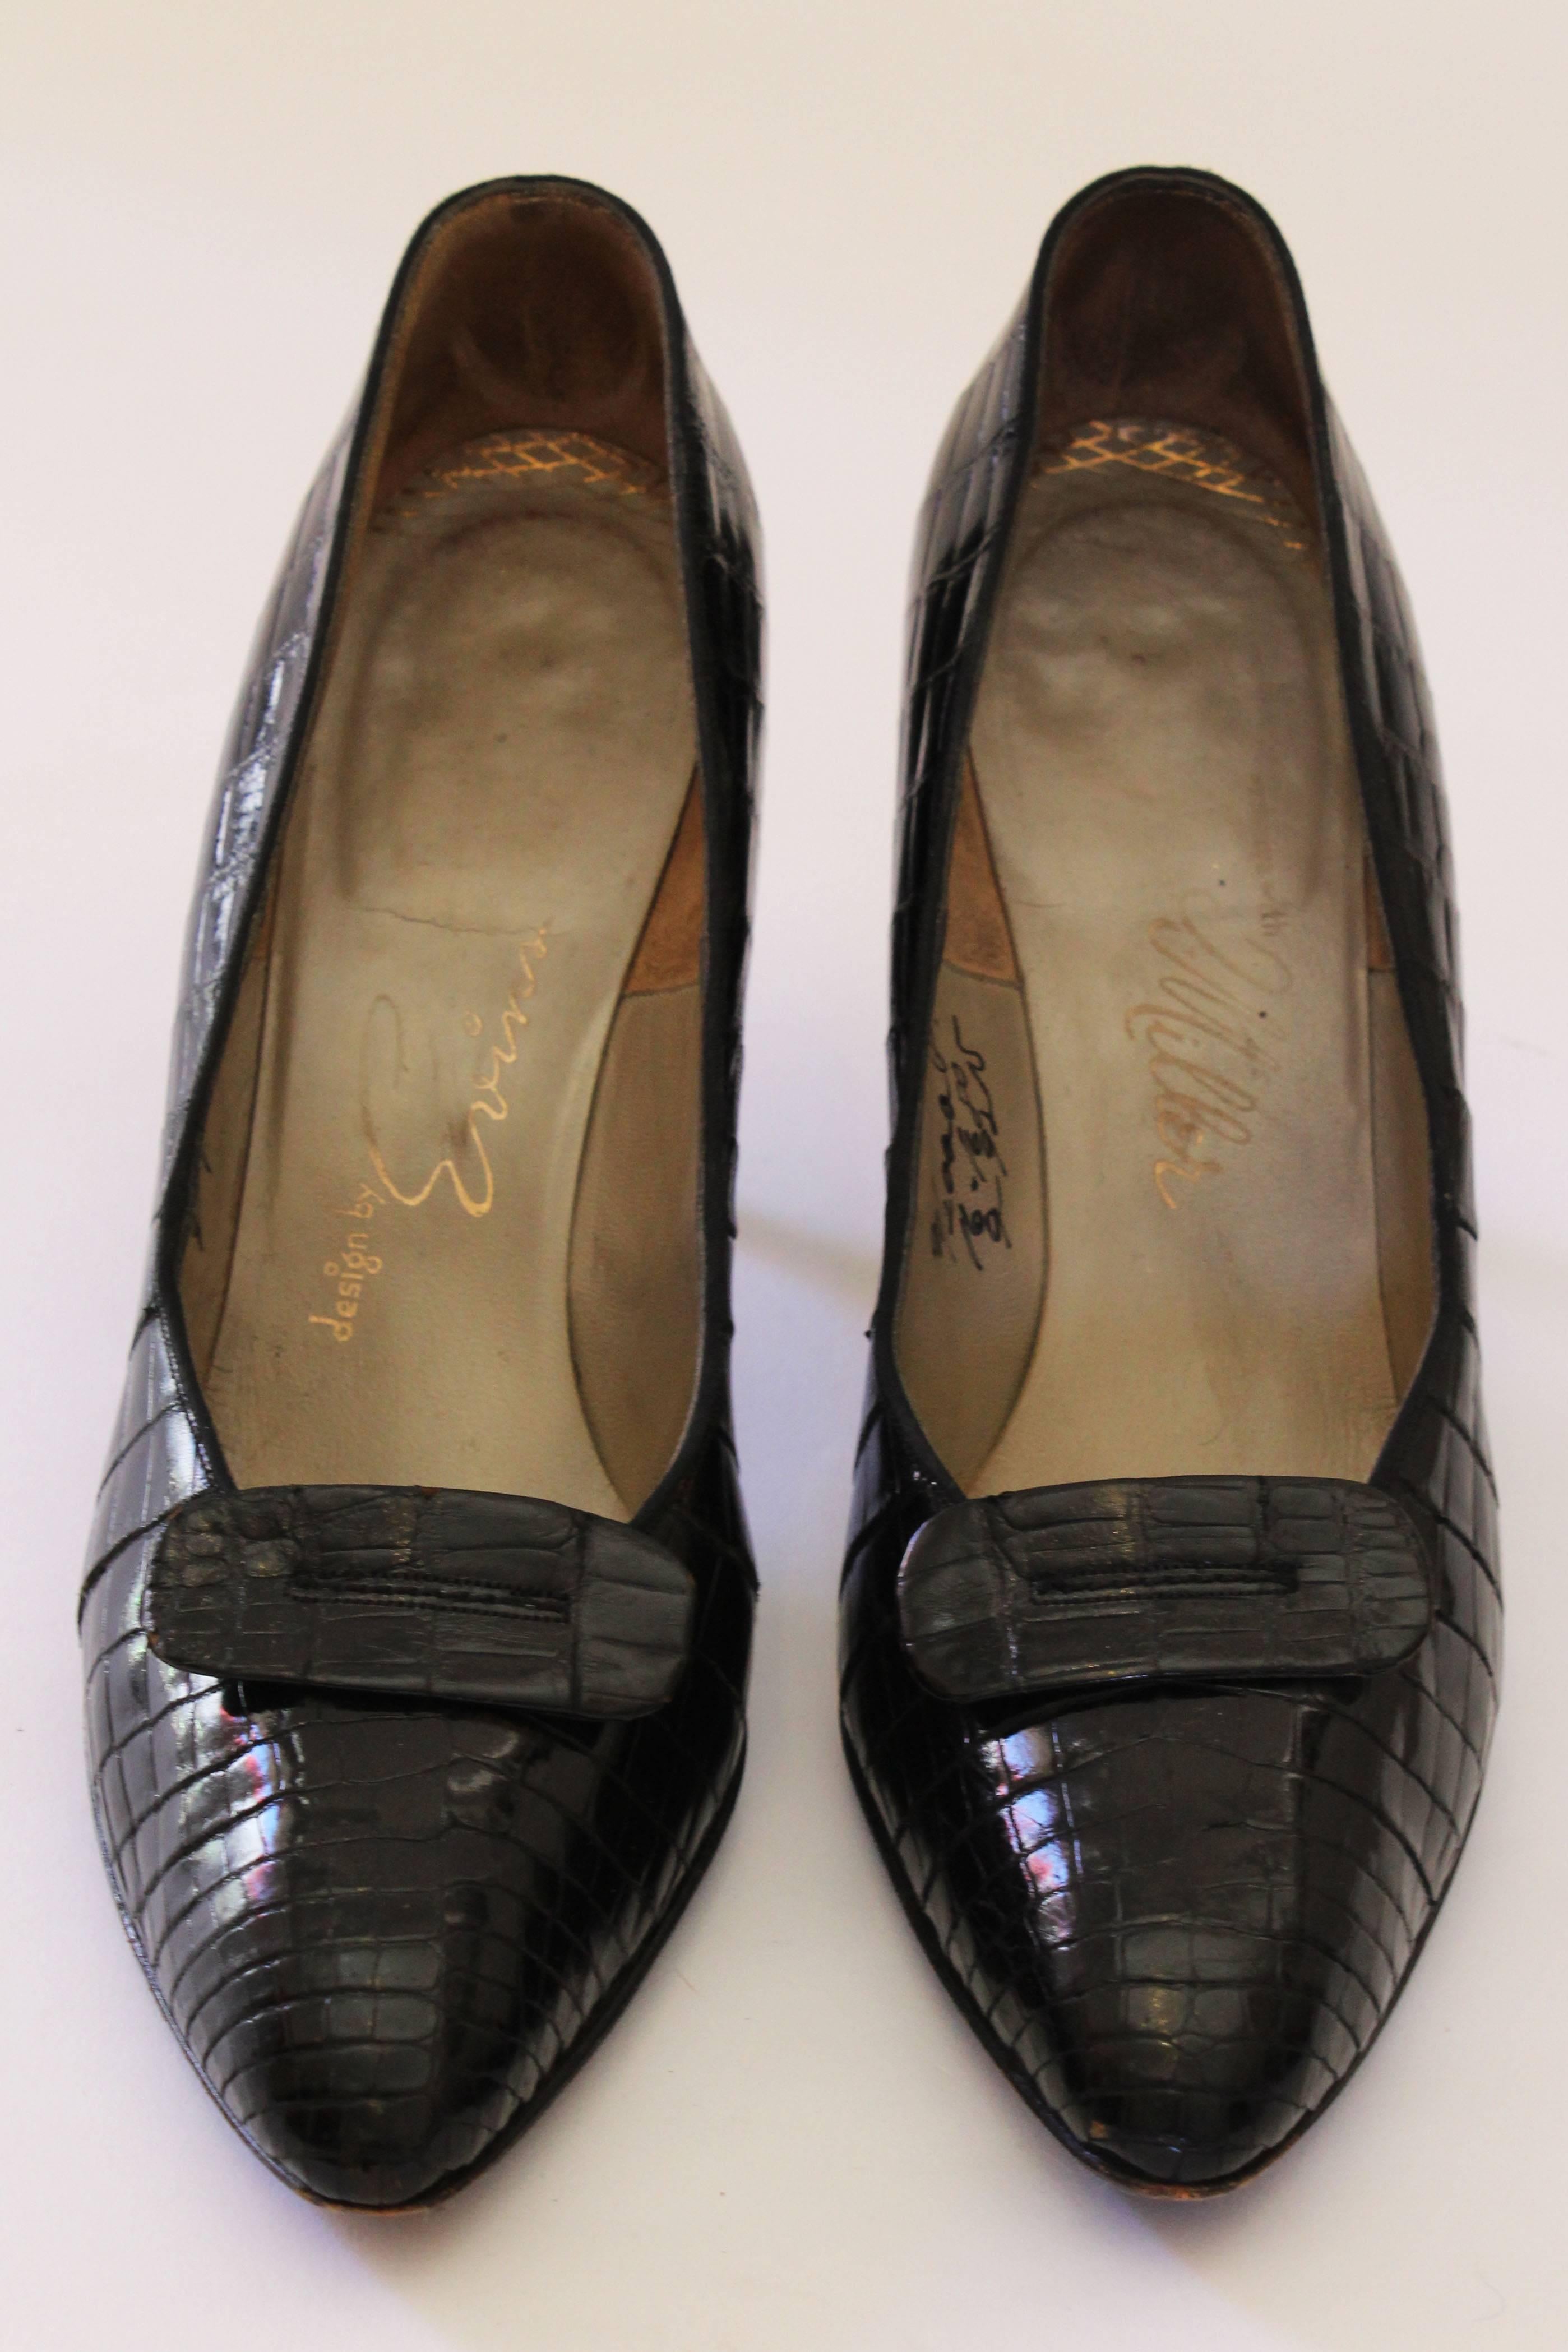 A chic pair of black crocodile court shoes with an oval tab on the front.
These shoes are beautifully made, and have leather lining and soles. The heel height is 3 1/2''.and they are about a UK 6 1/2, EU 39